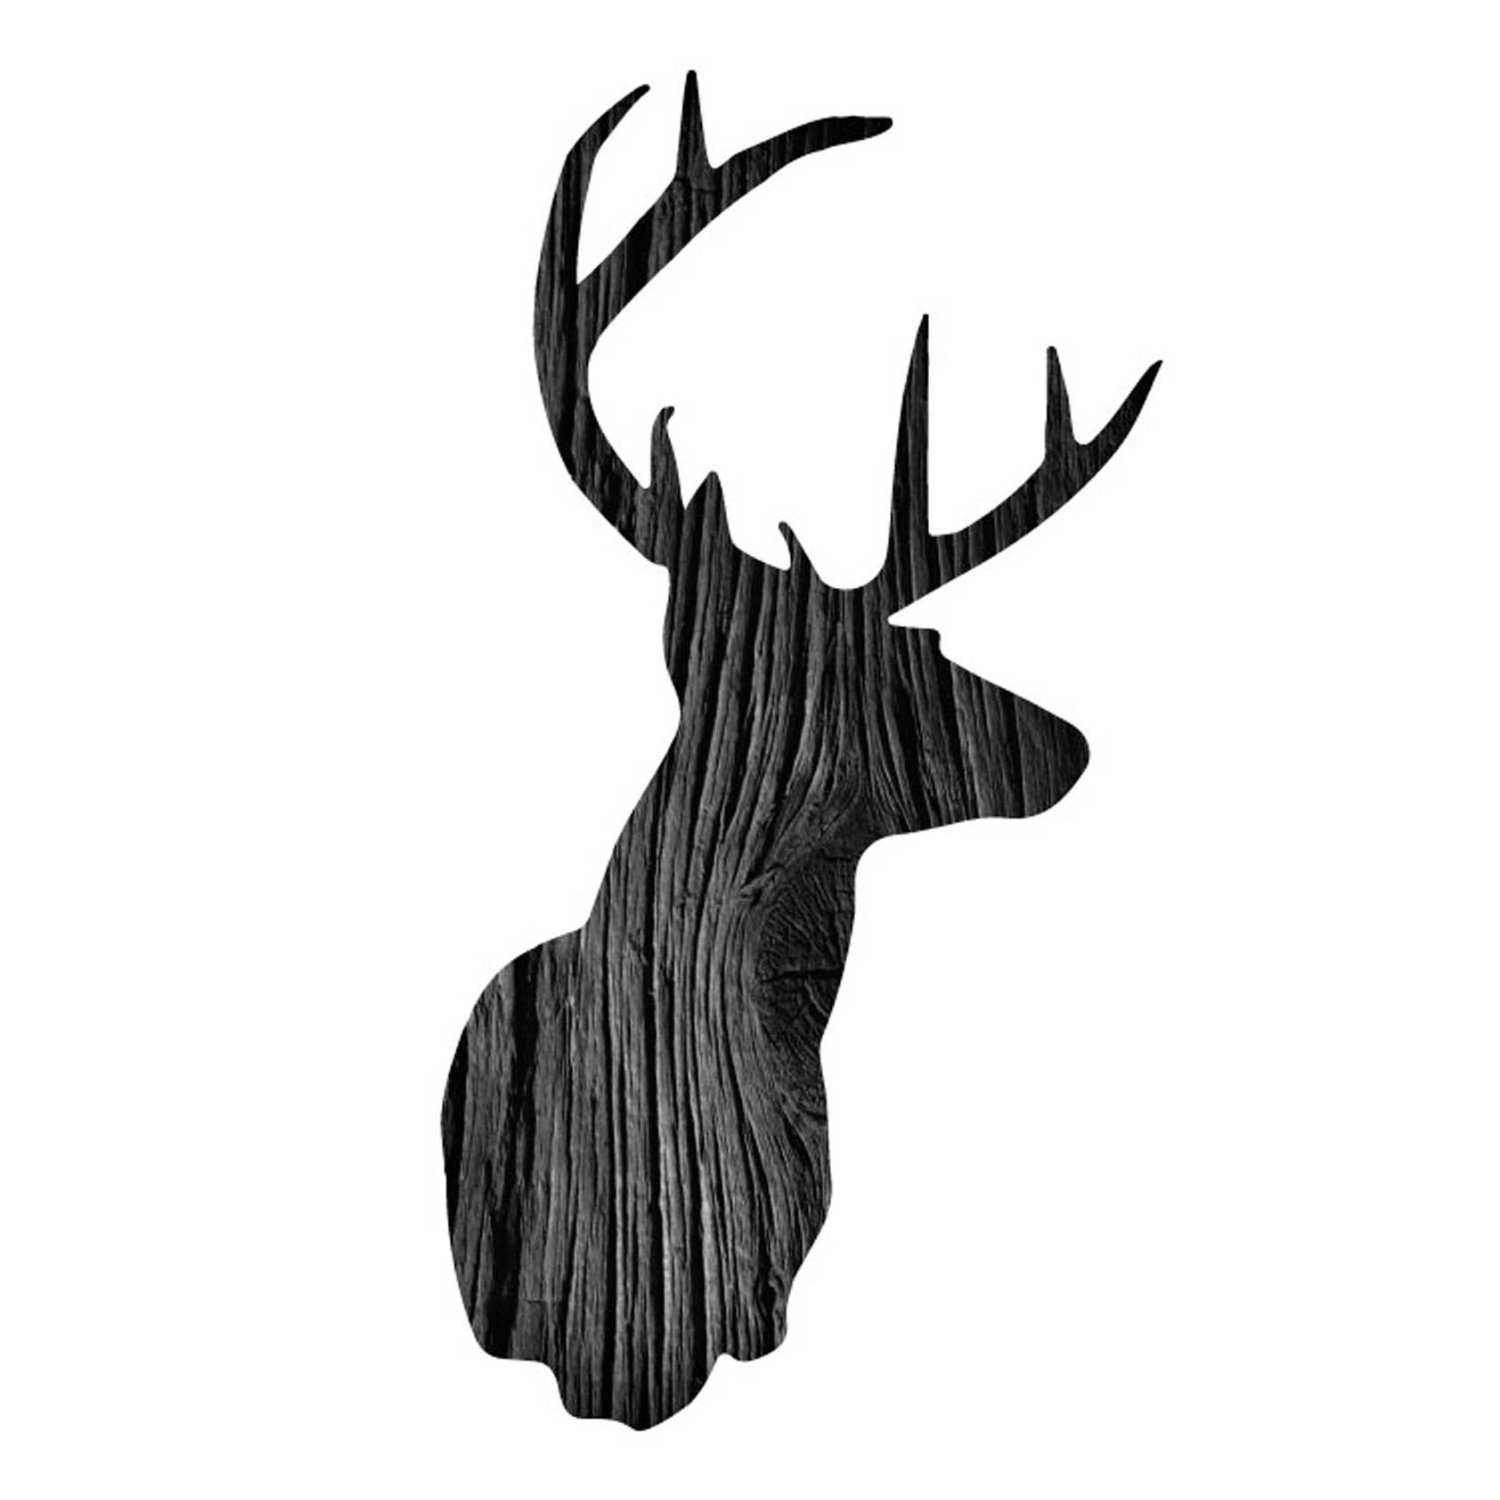  - Deer Head Silhouette in Black and White Wood Texture 